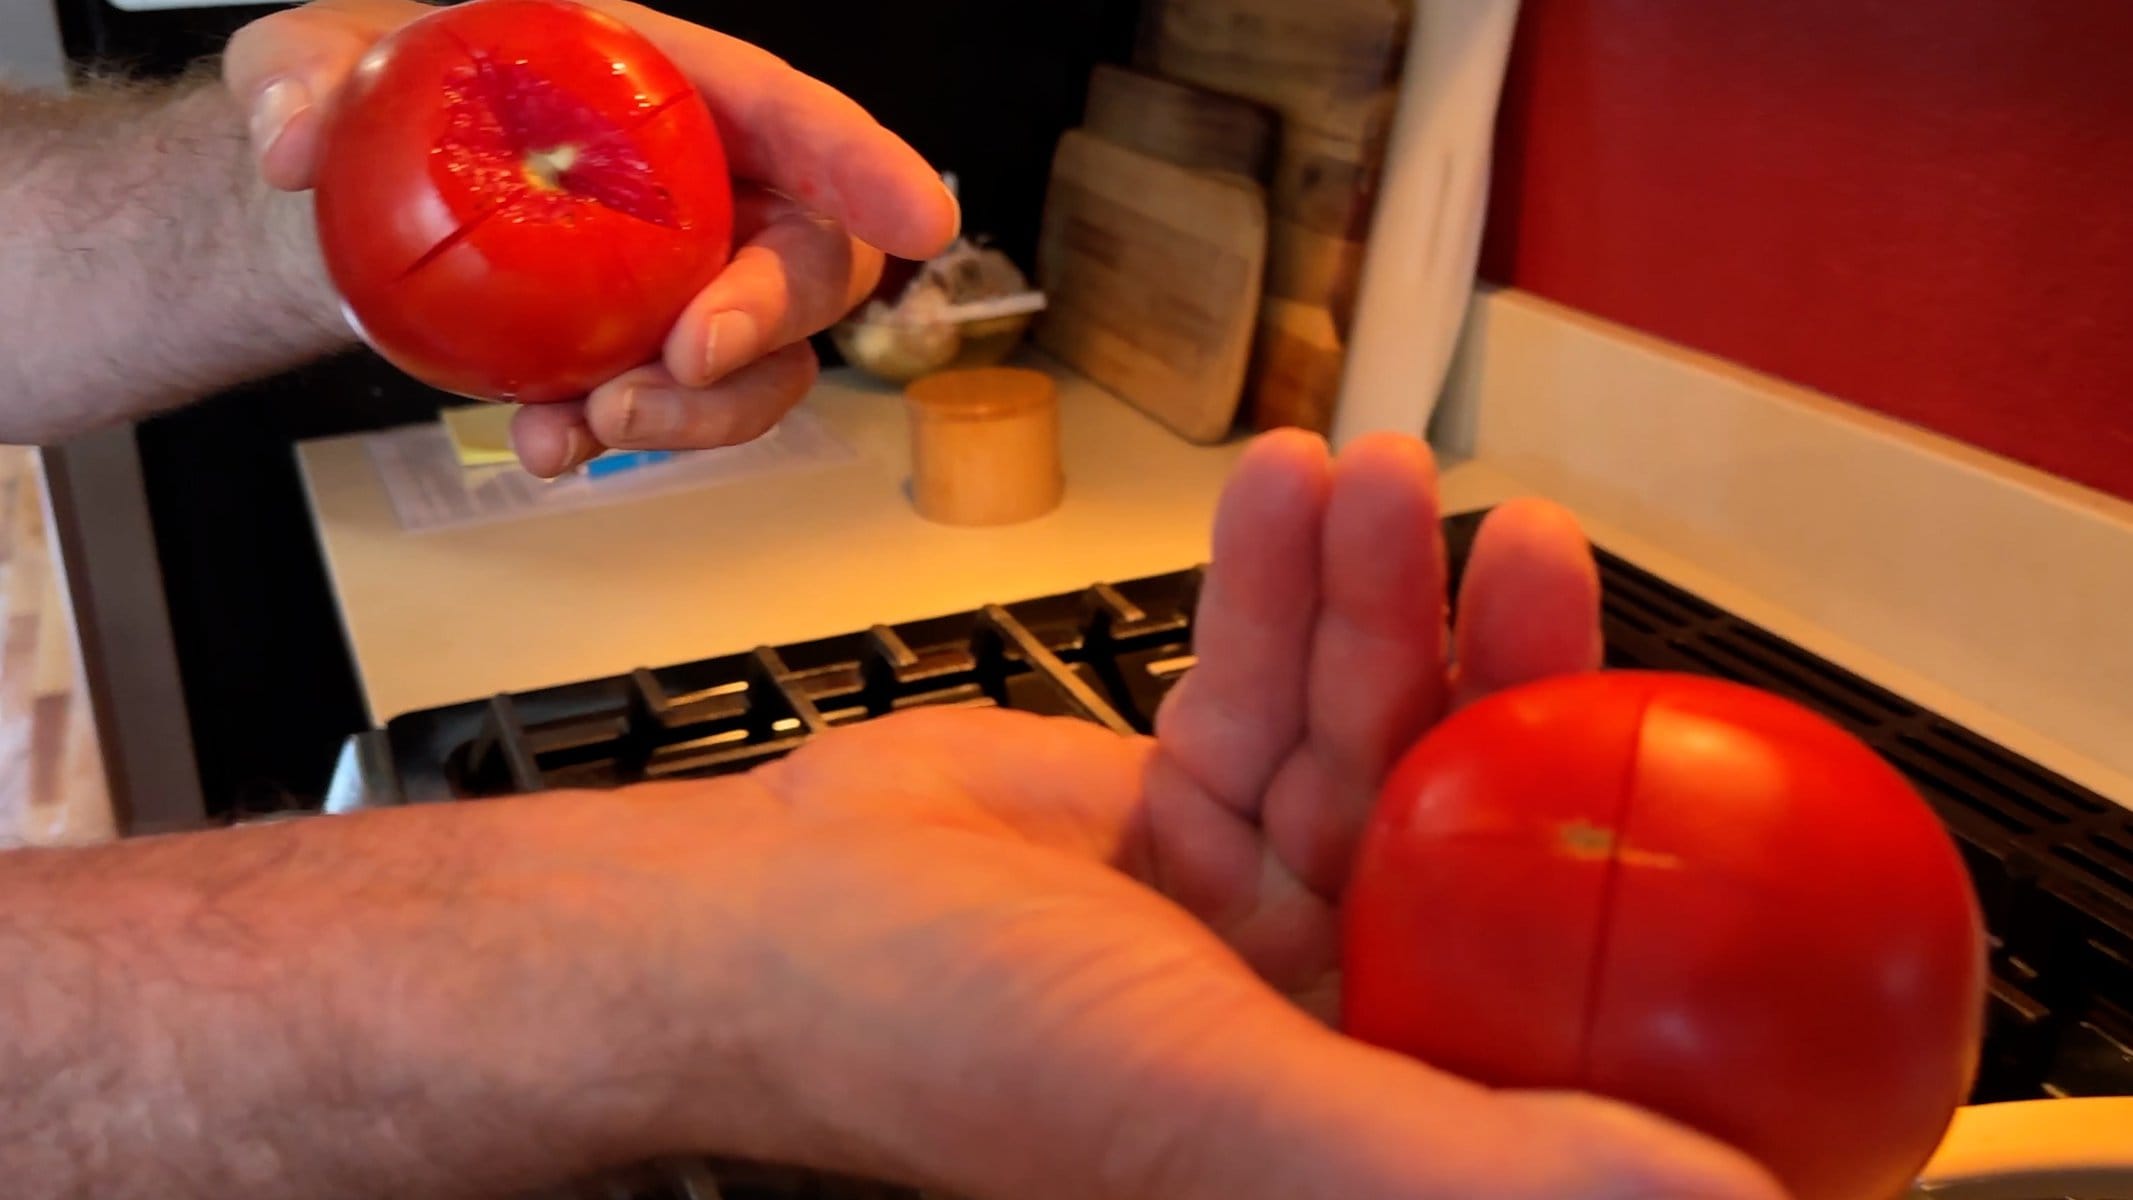 Tomatoes showing the 'x' knife cut in the ends